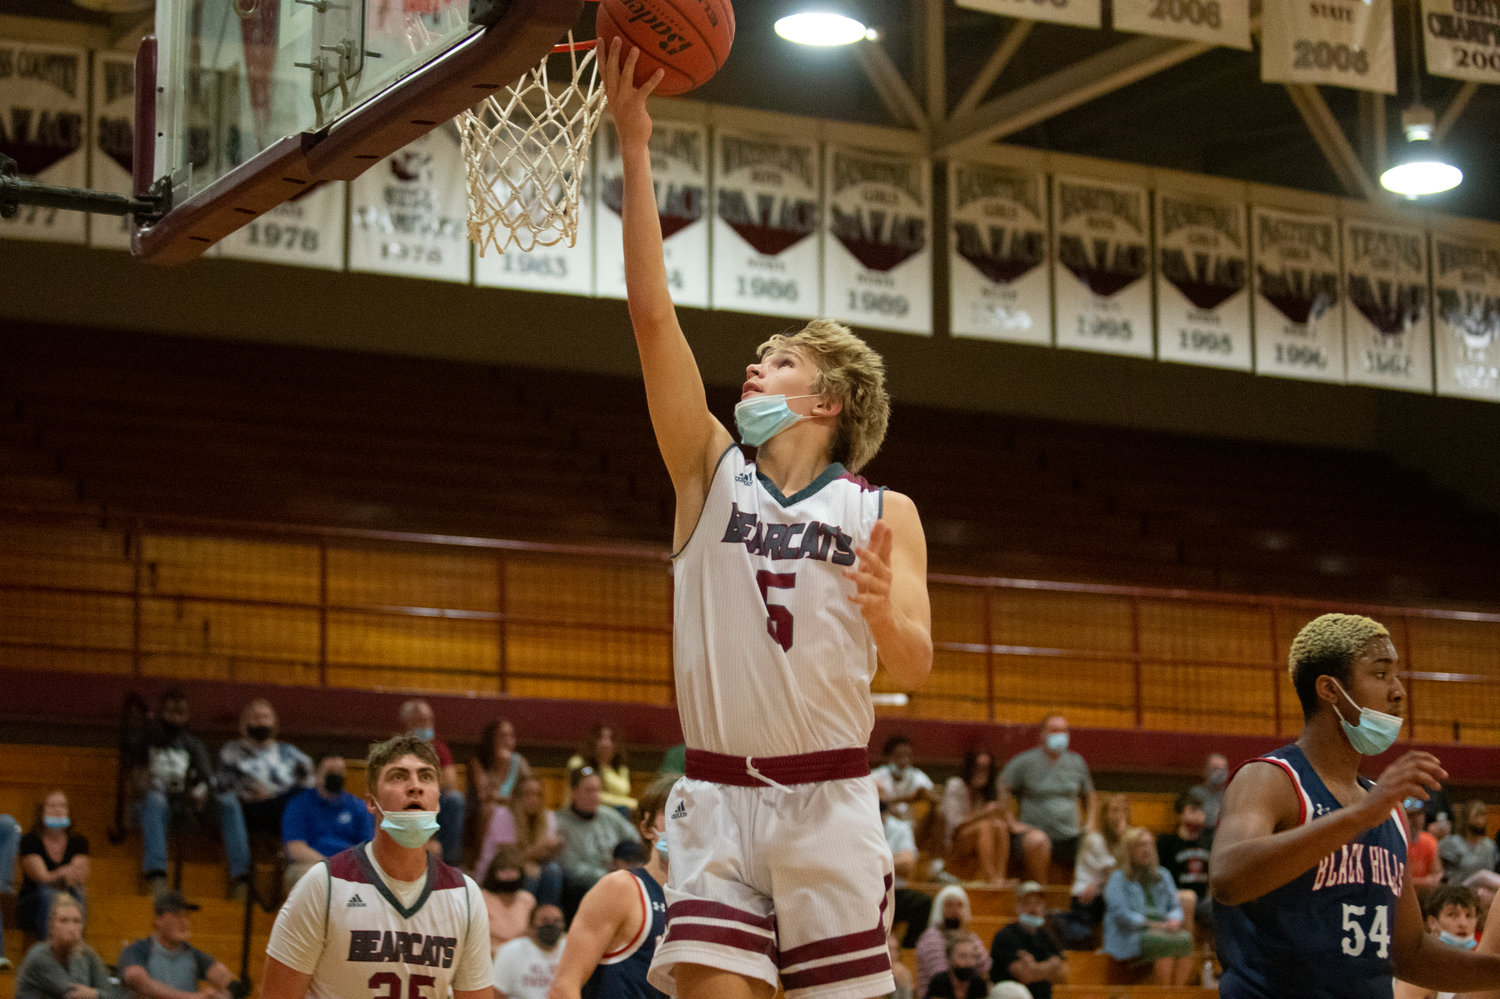 W.F. West junior Dirk Plakinger (5) gets an uncontested layup against Black Hills on Friday.